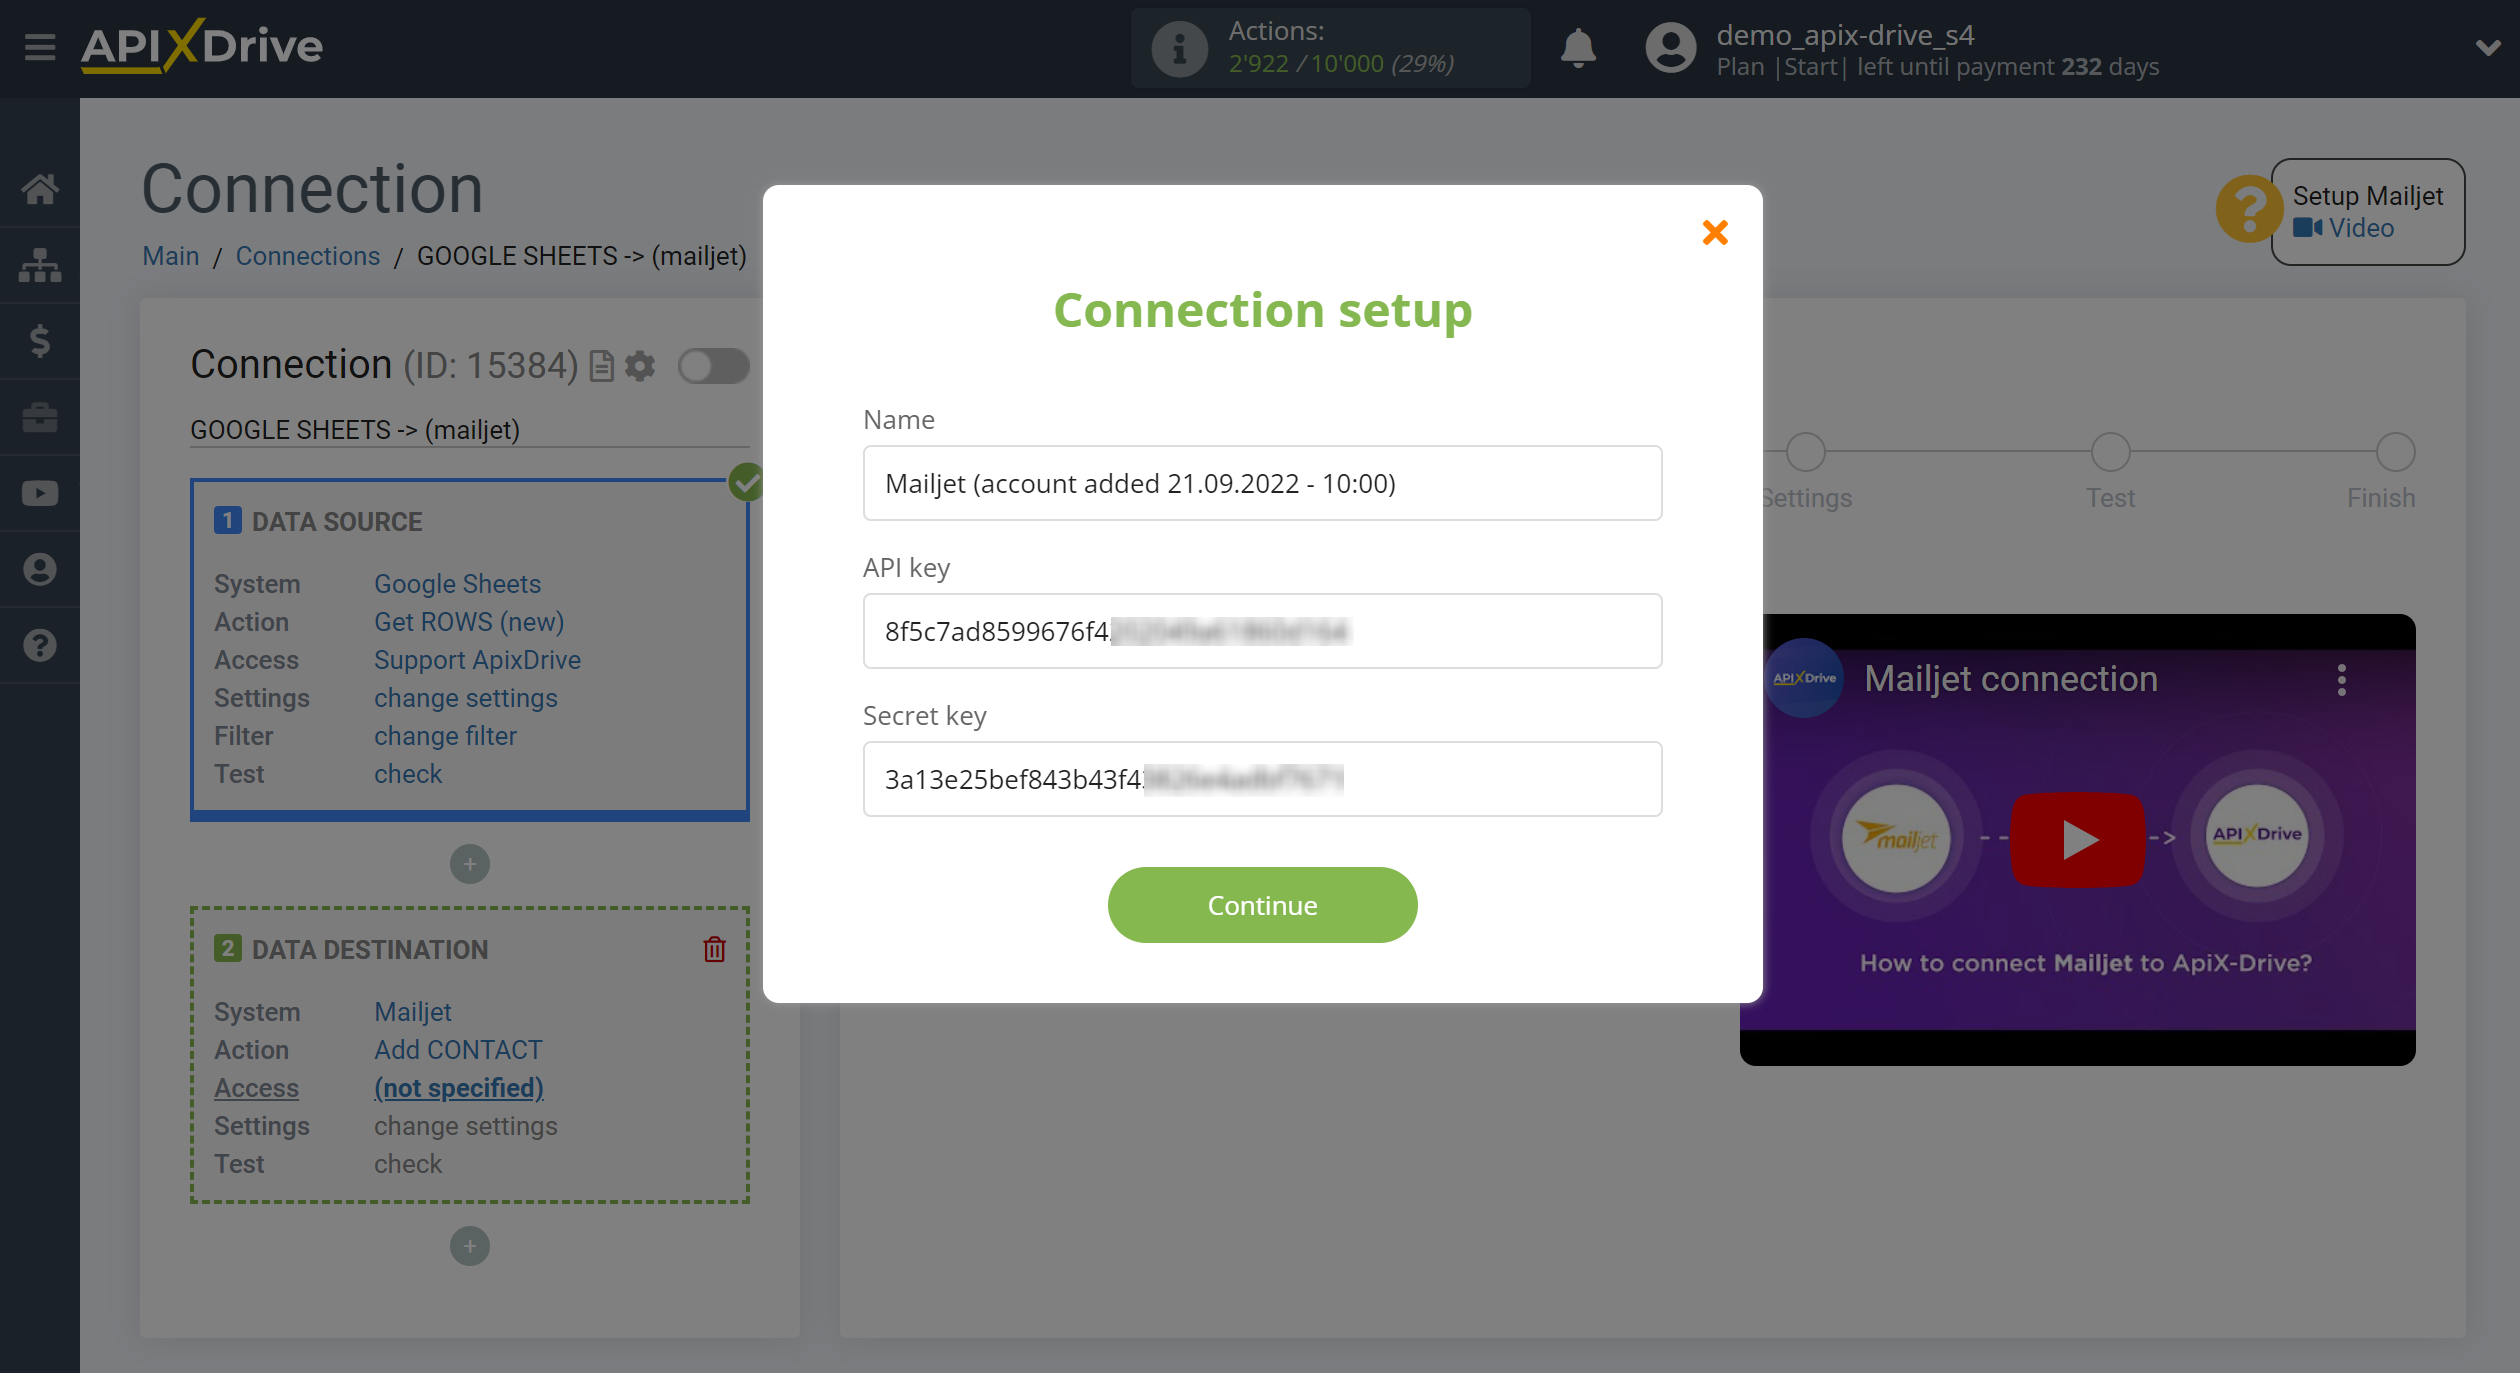 How to Connect Mailjet as Data Destination | Account connection